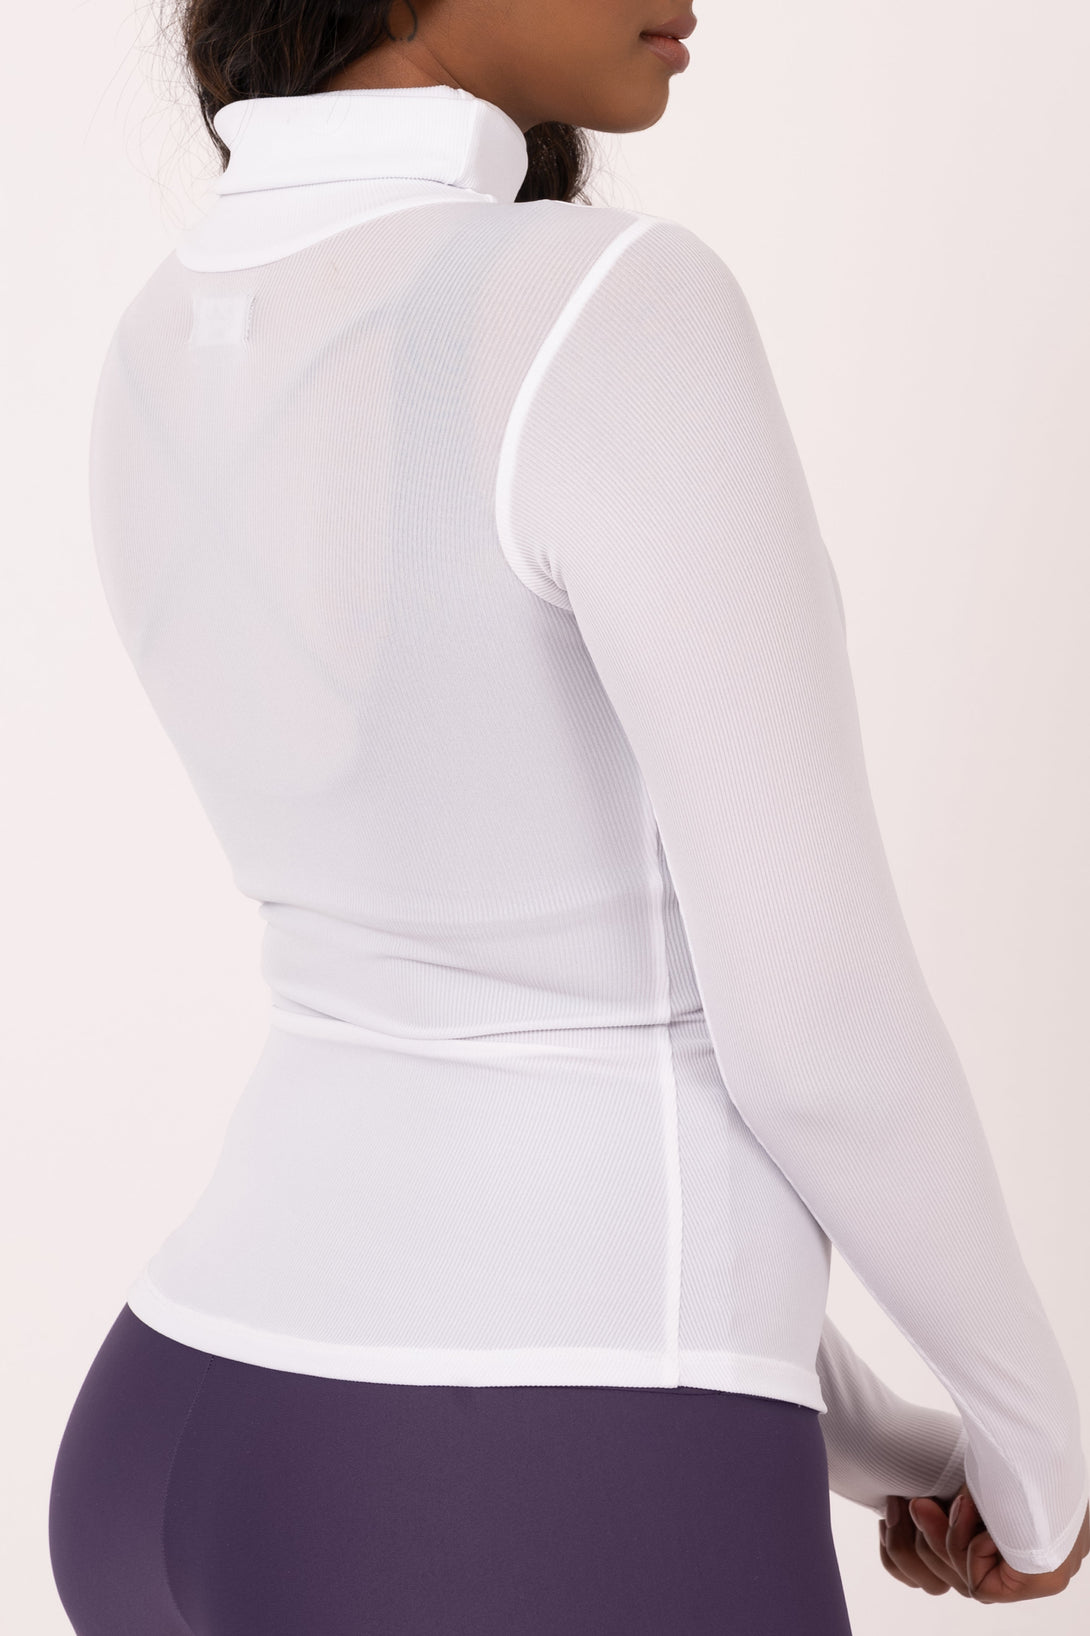 White Rib Knit - Fitted Turtle Neck W Long Sleeves-Activewear-Exoticathletica